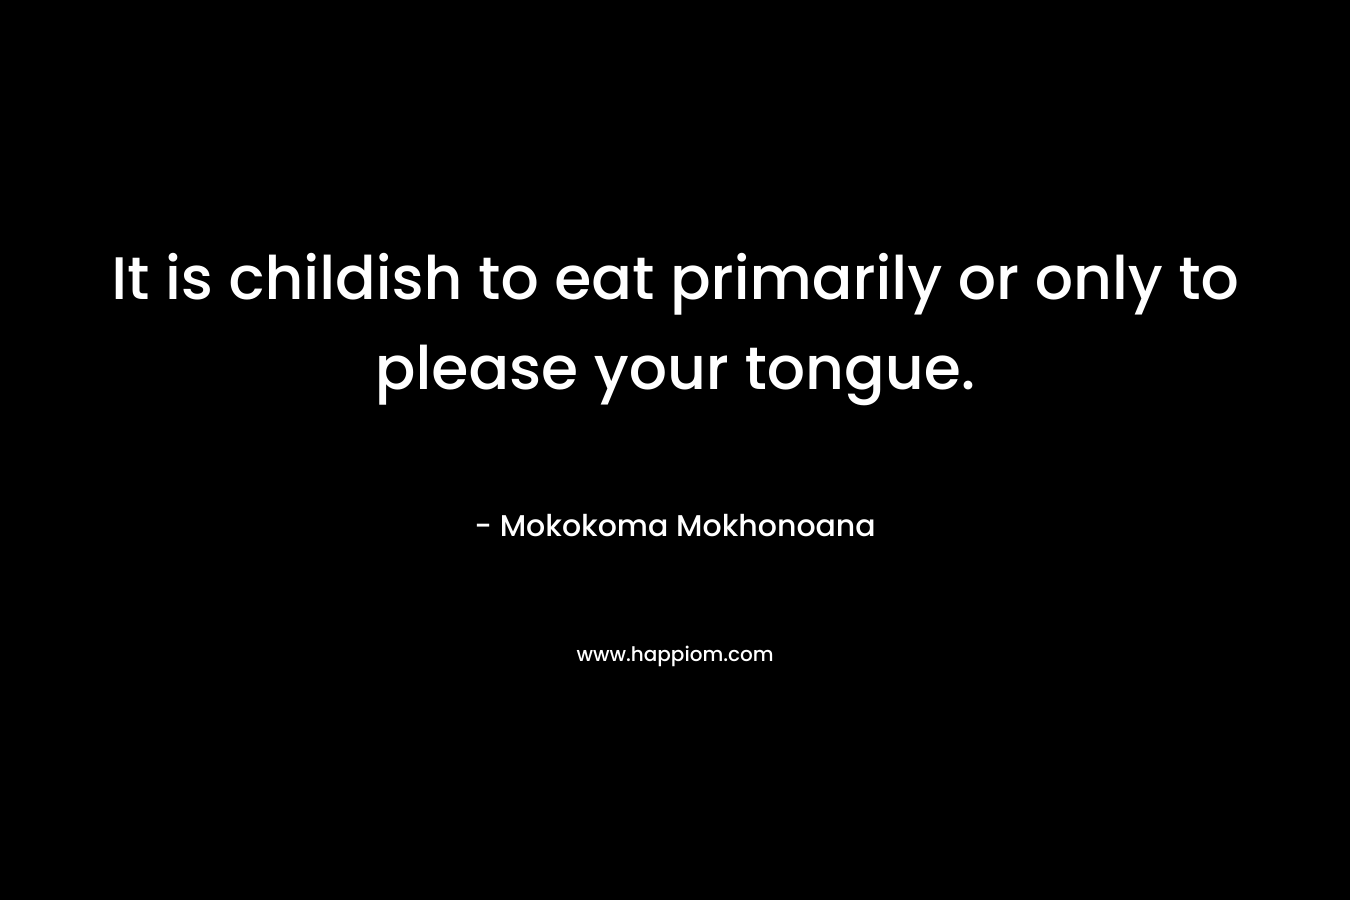 It is childish to eat primarily or only to please your tongue.